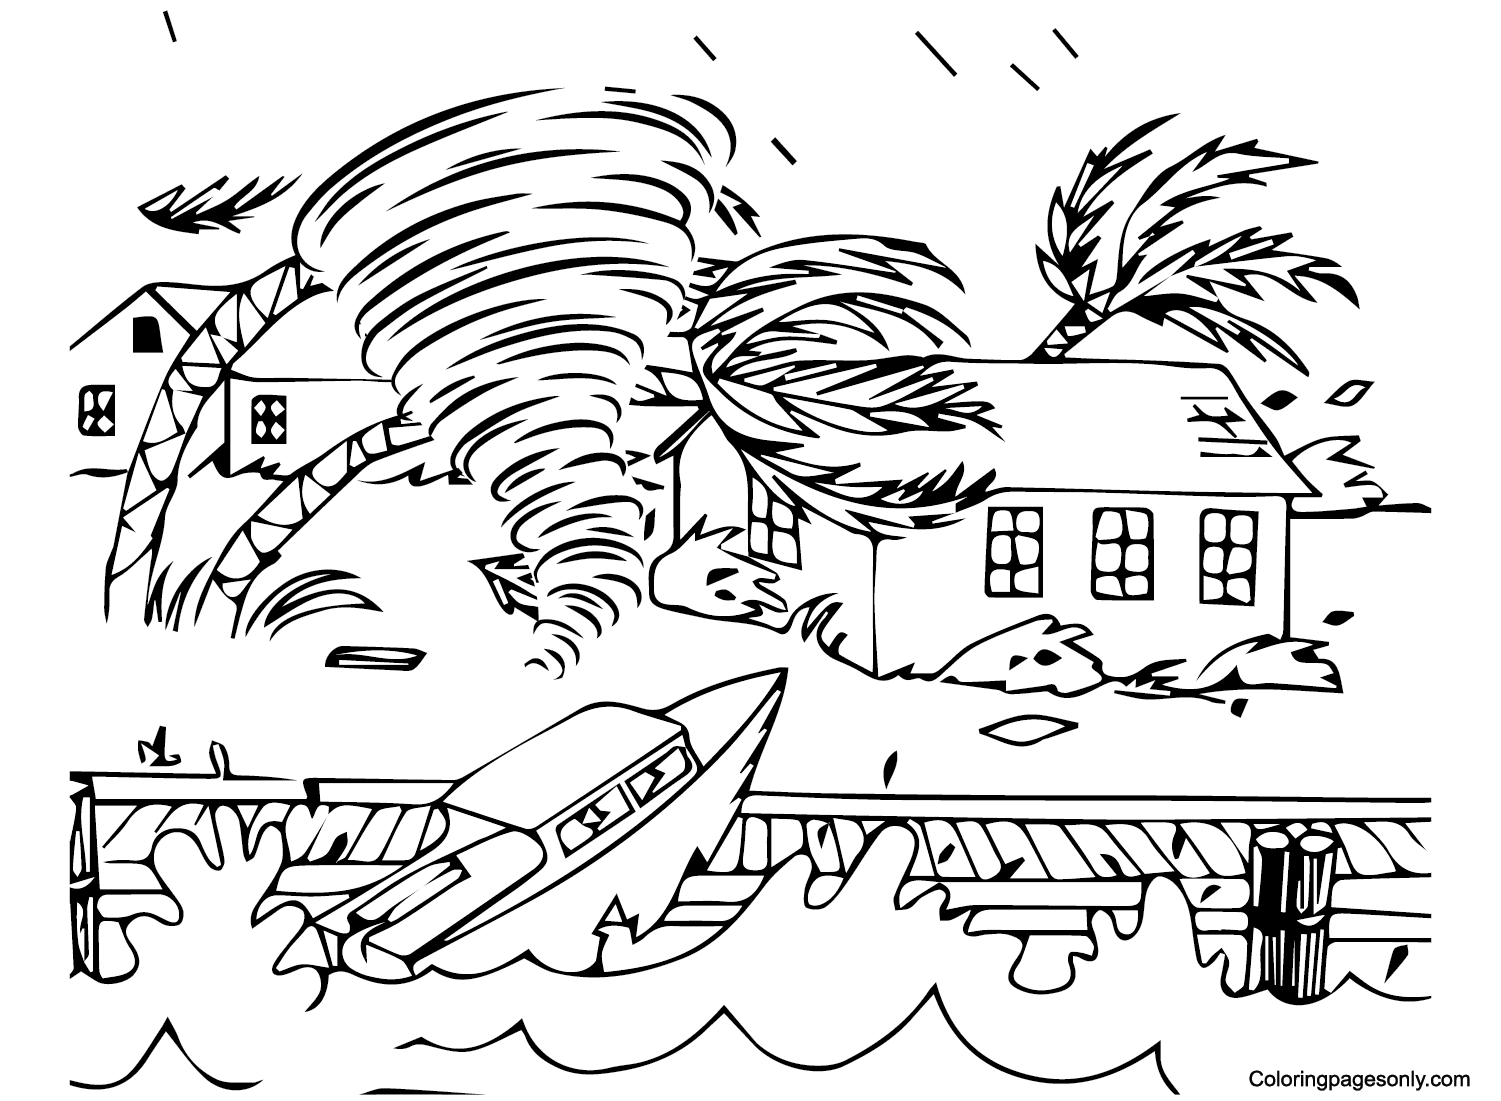 Tornado Images Coloring Page